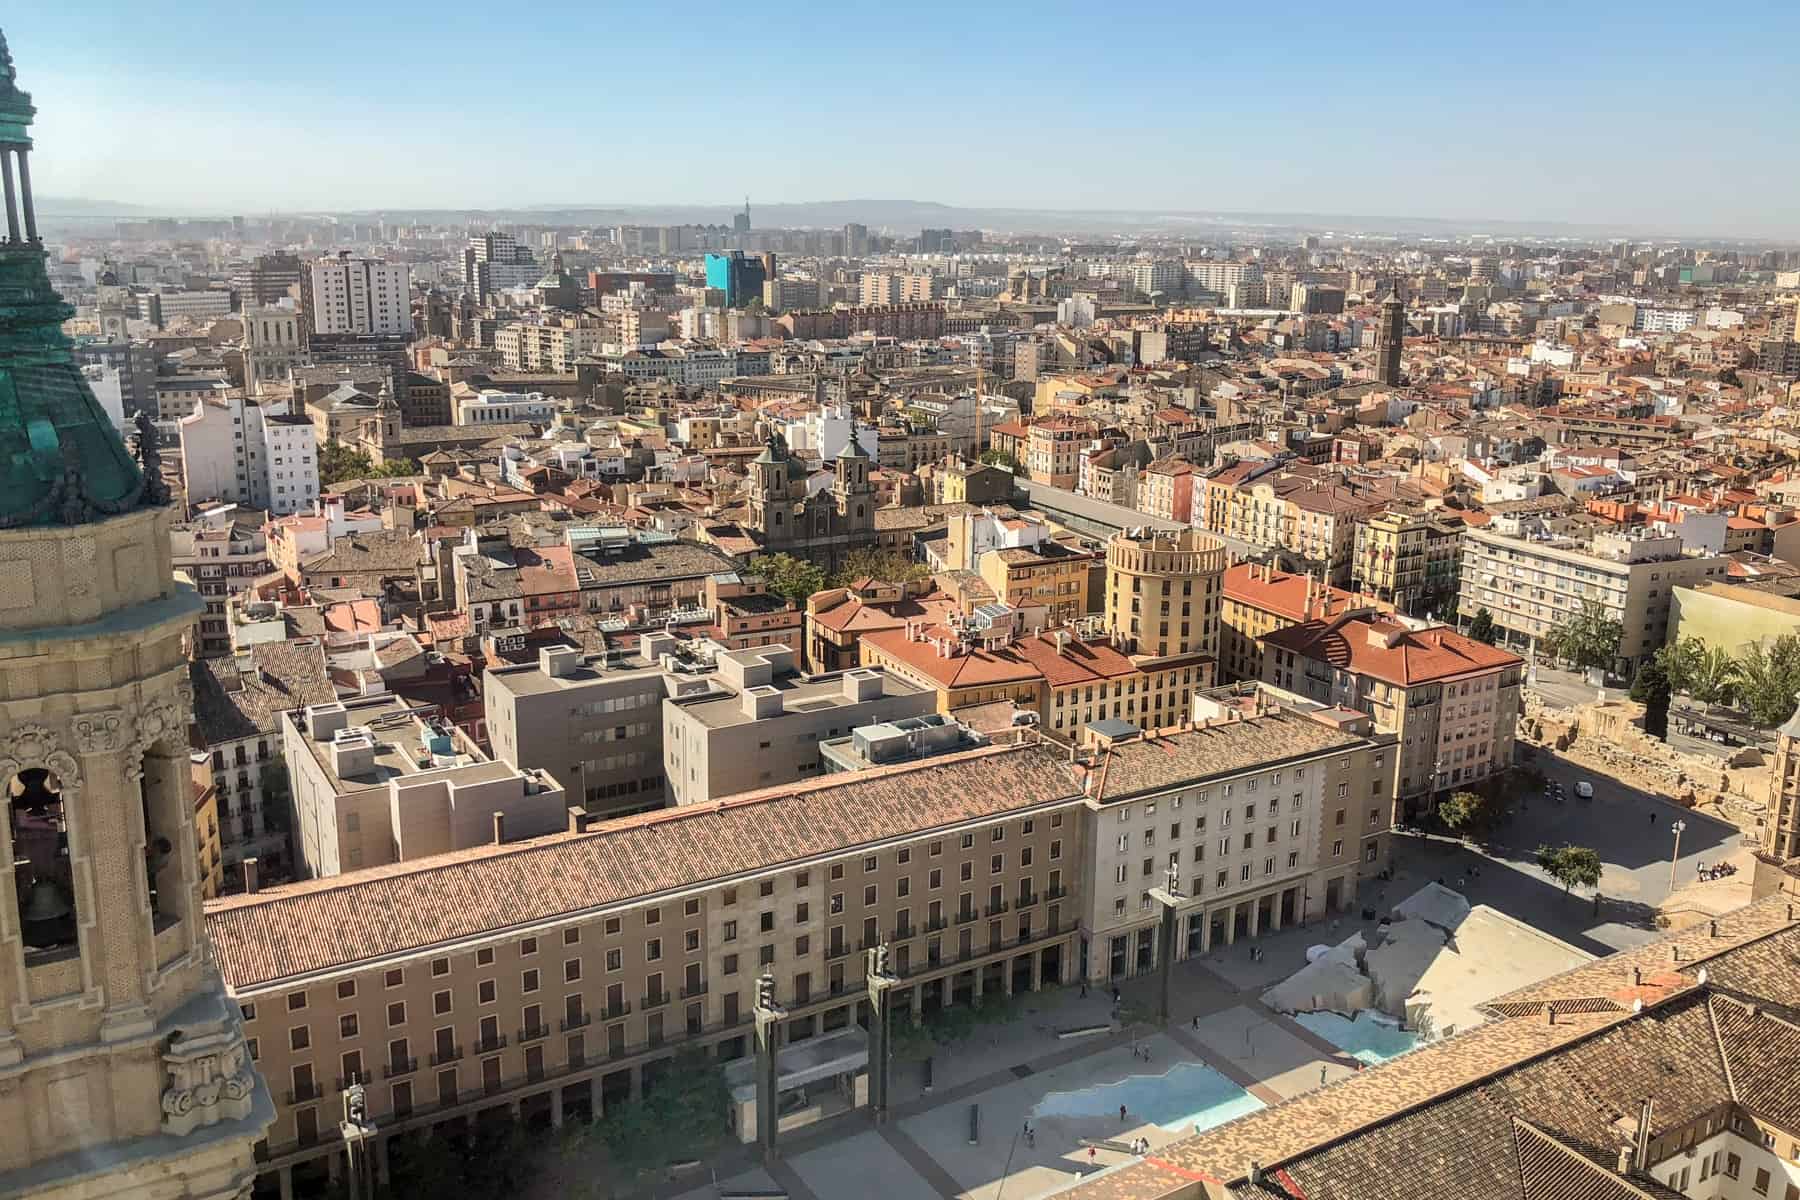 An elevated view of the densely packed Zaragoza city with a closer view down to the long building lined Plaza del Pilar square that features a blue Fuente de la Hispanidad water fountain in the shape of Latin America. 